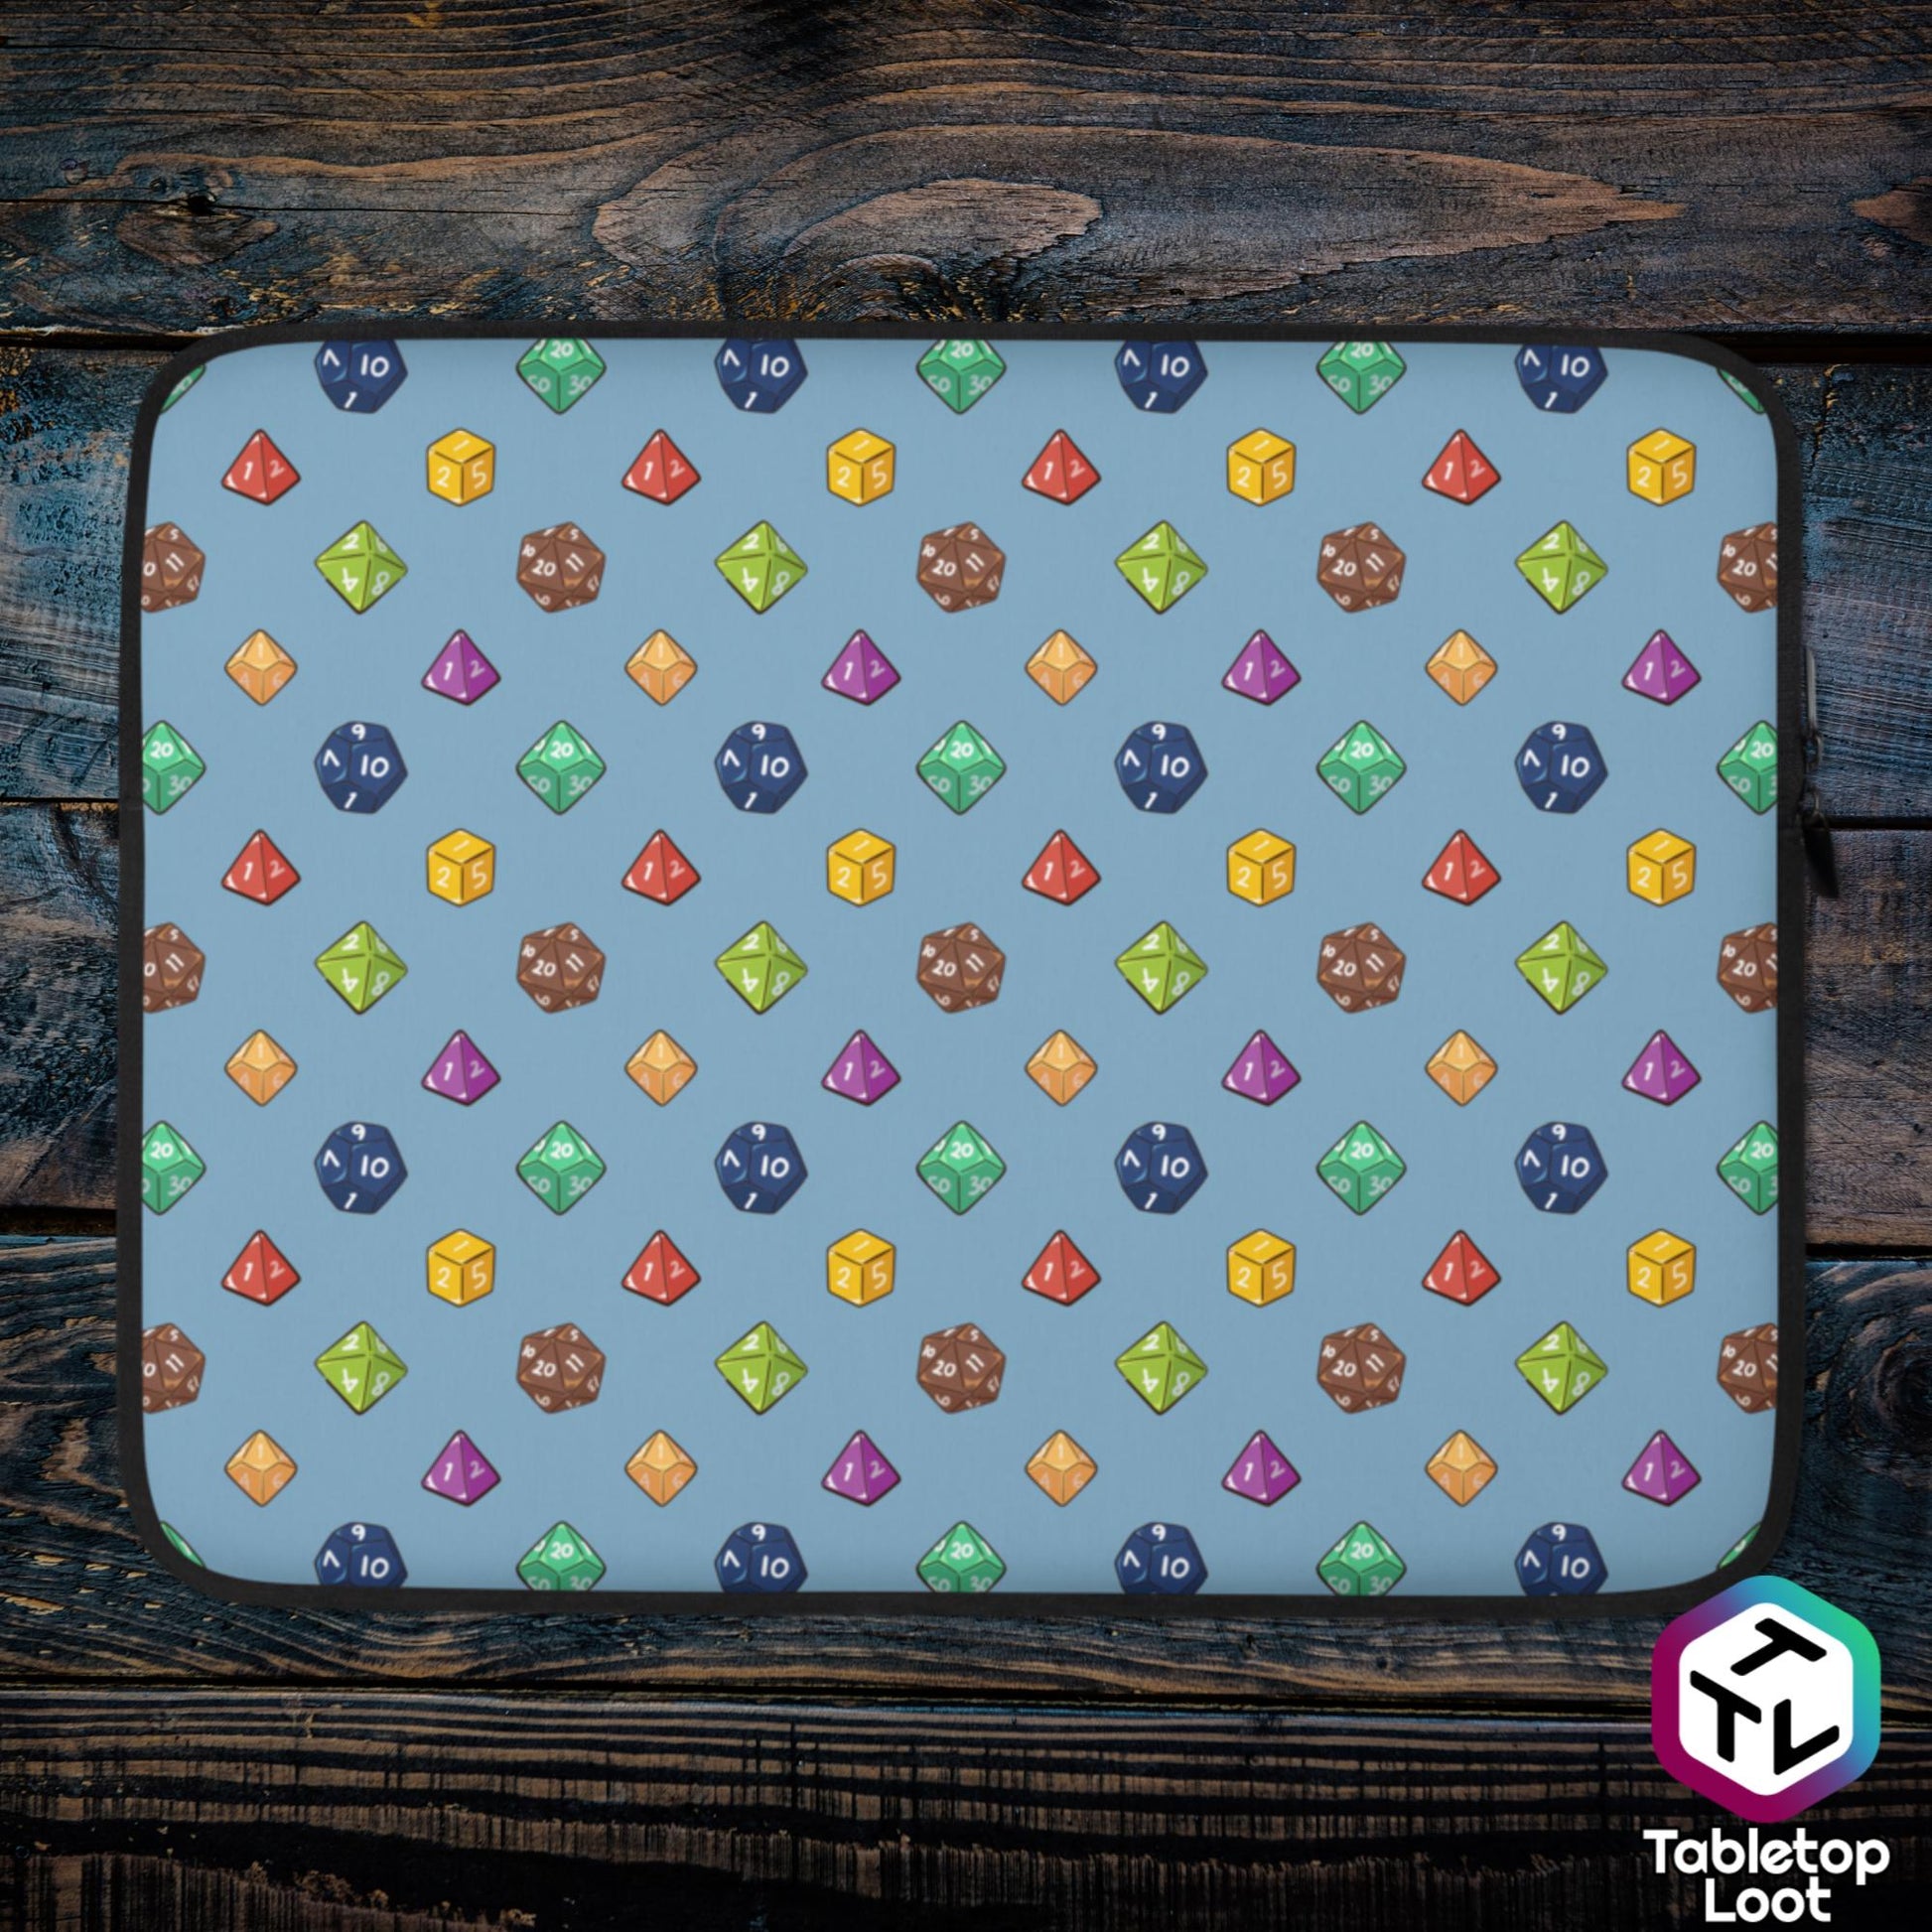 A 15 inch zippered laptop sleeve has a polyhedral dice pattern in red, brown, yellow, teal, blue, and purple on a blue background.